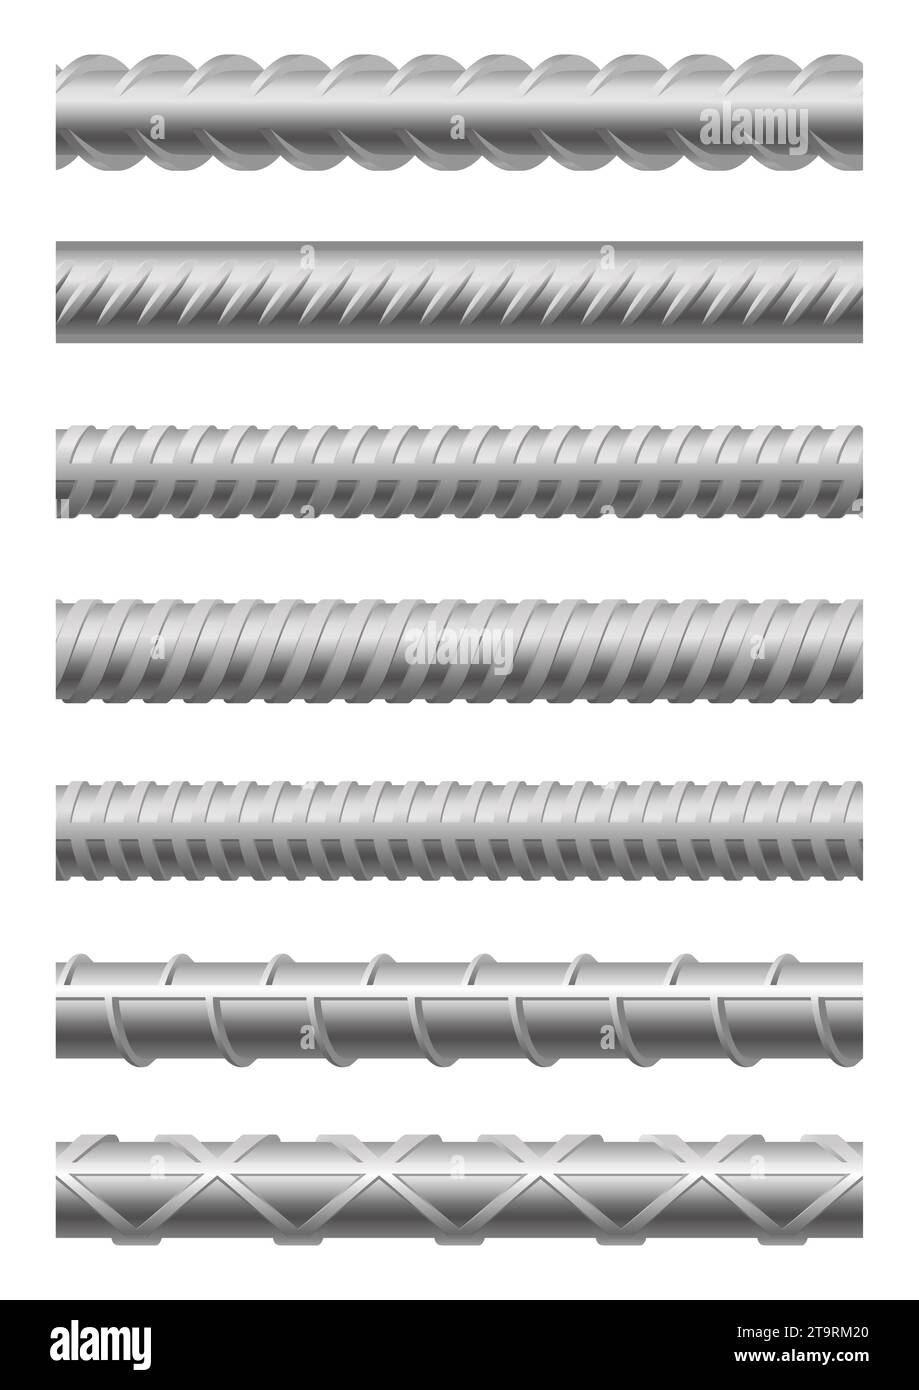 Endless rebars metal profiles rod and armature isolated set Stock Vector